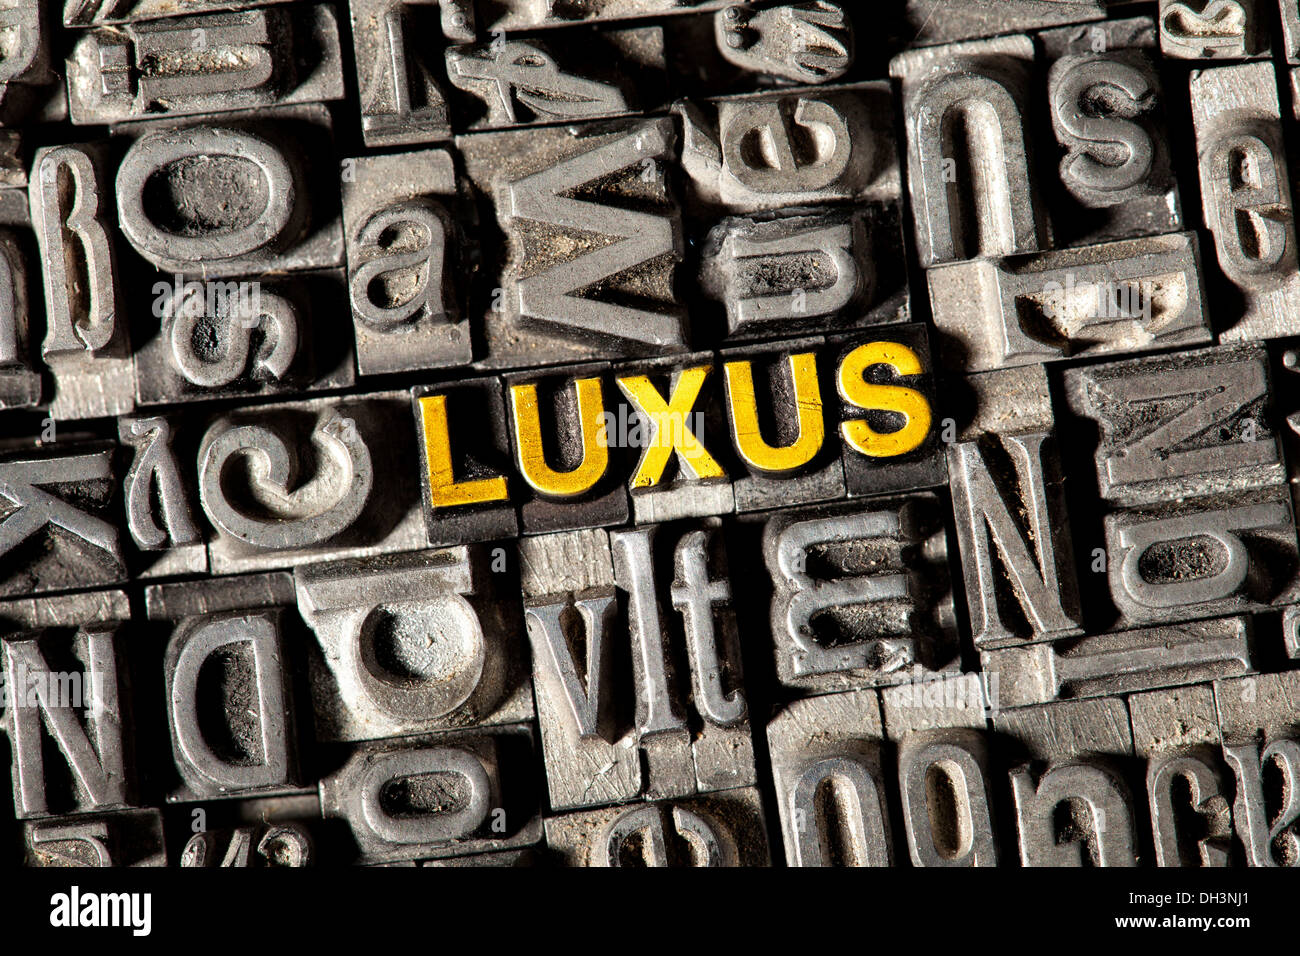 Old lead letters forming the word 'LUXUS', German for 'luxury' Stock Photo